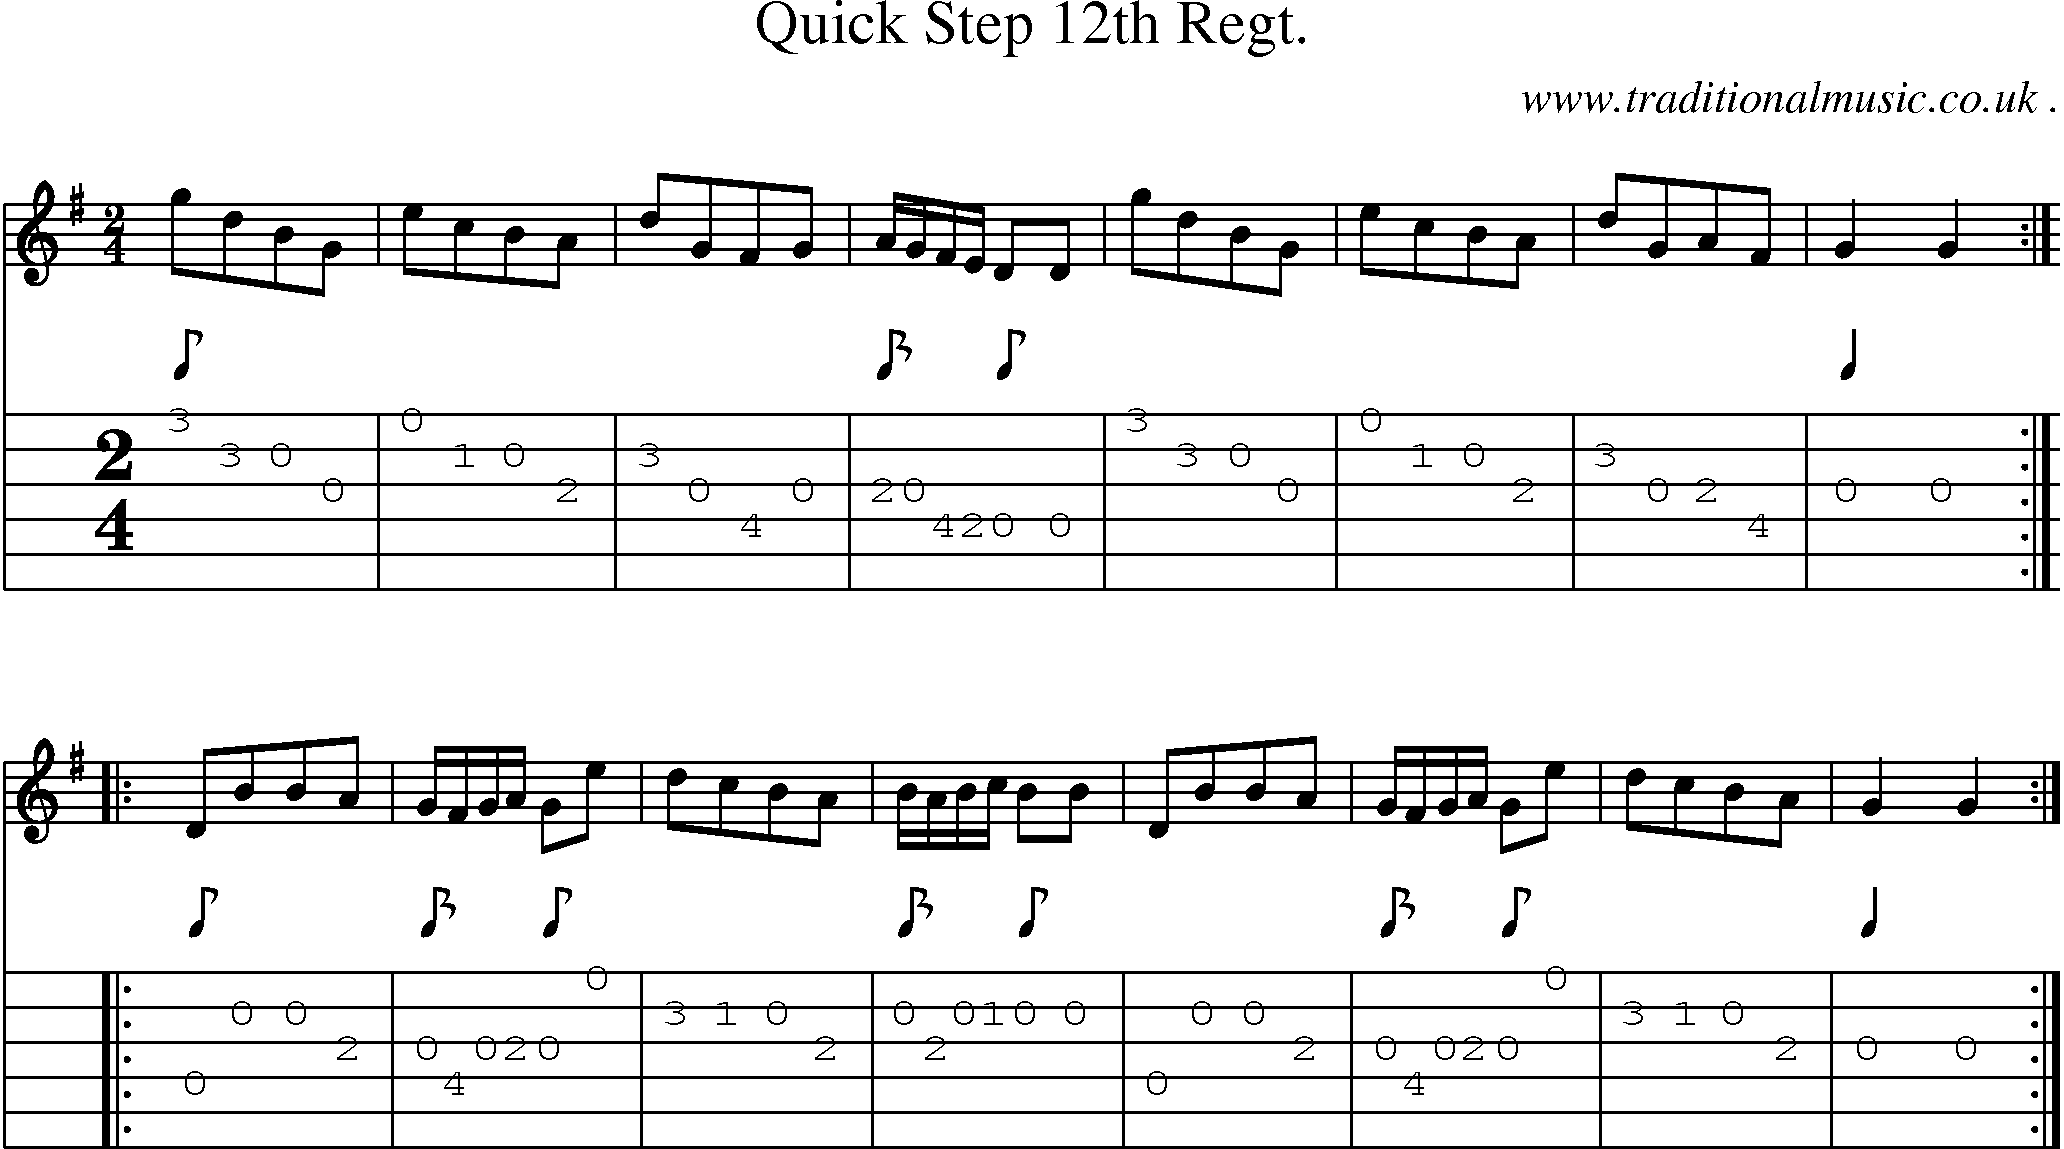 Sheet-Music and Guitar Tabs for Quick Step 12th Regt